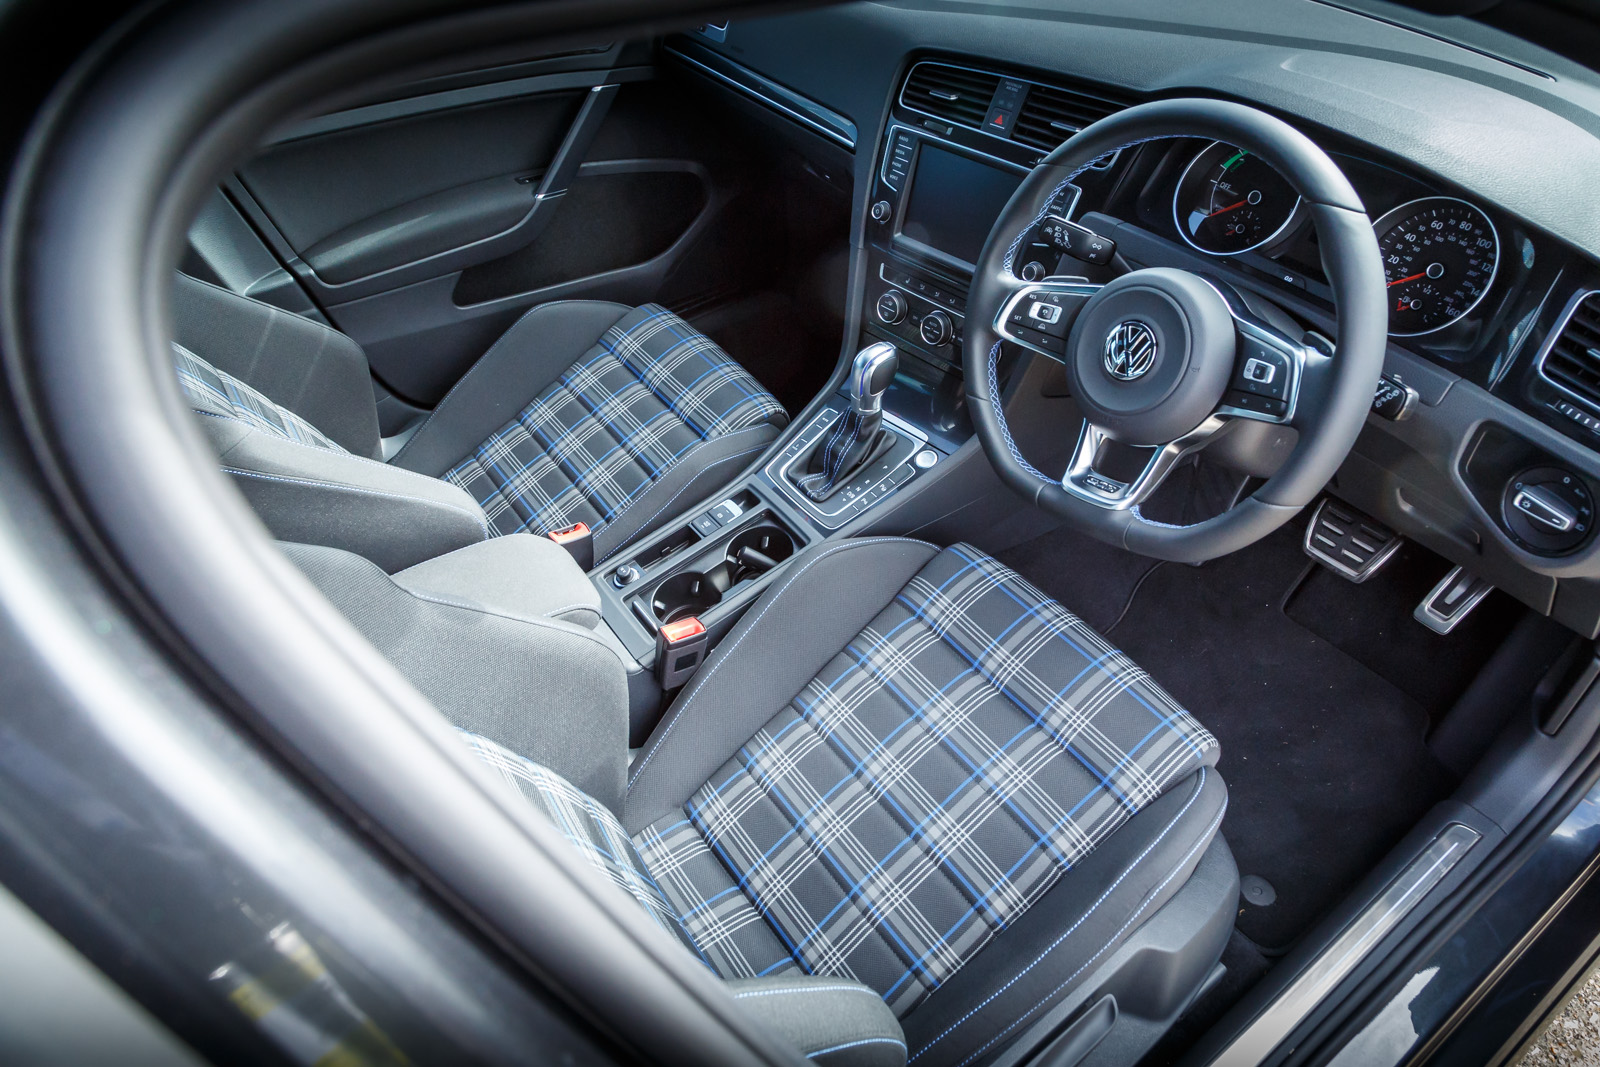 How To Clean Car Interior Seats So They Stay Comfortable